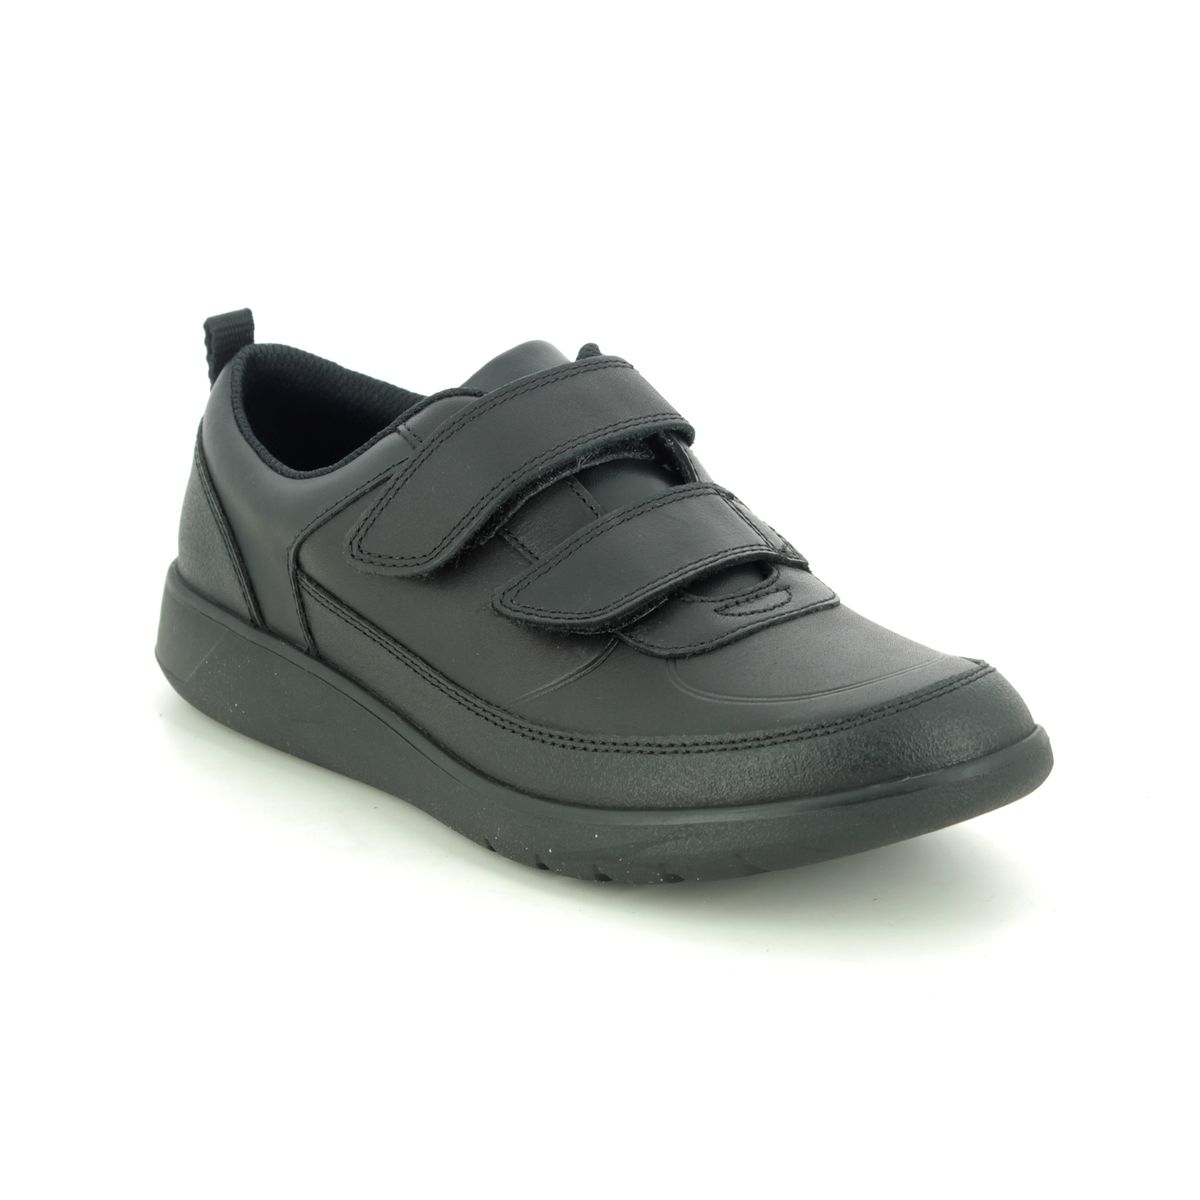 Clarks Scape Flare Y Black Leather Kids Boys Shoes 494096F In Size 3 In Plain Black Leather F Width Fitting Regular Fit For School For kids